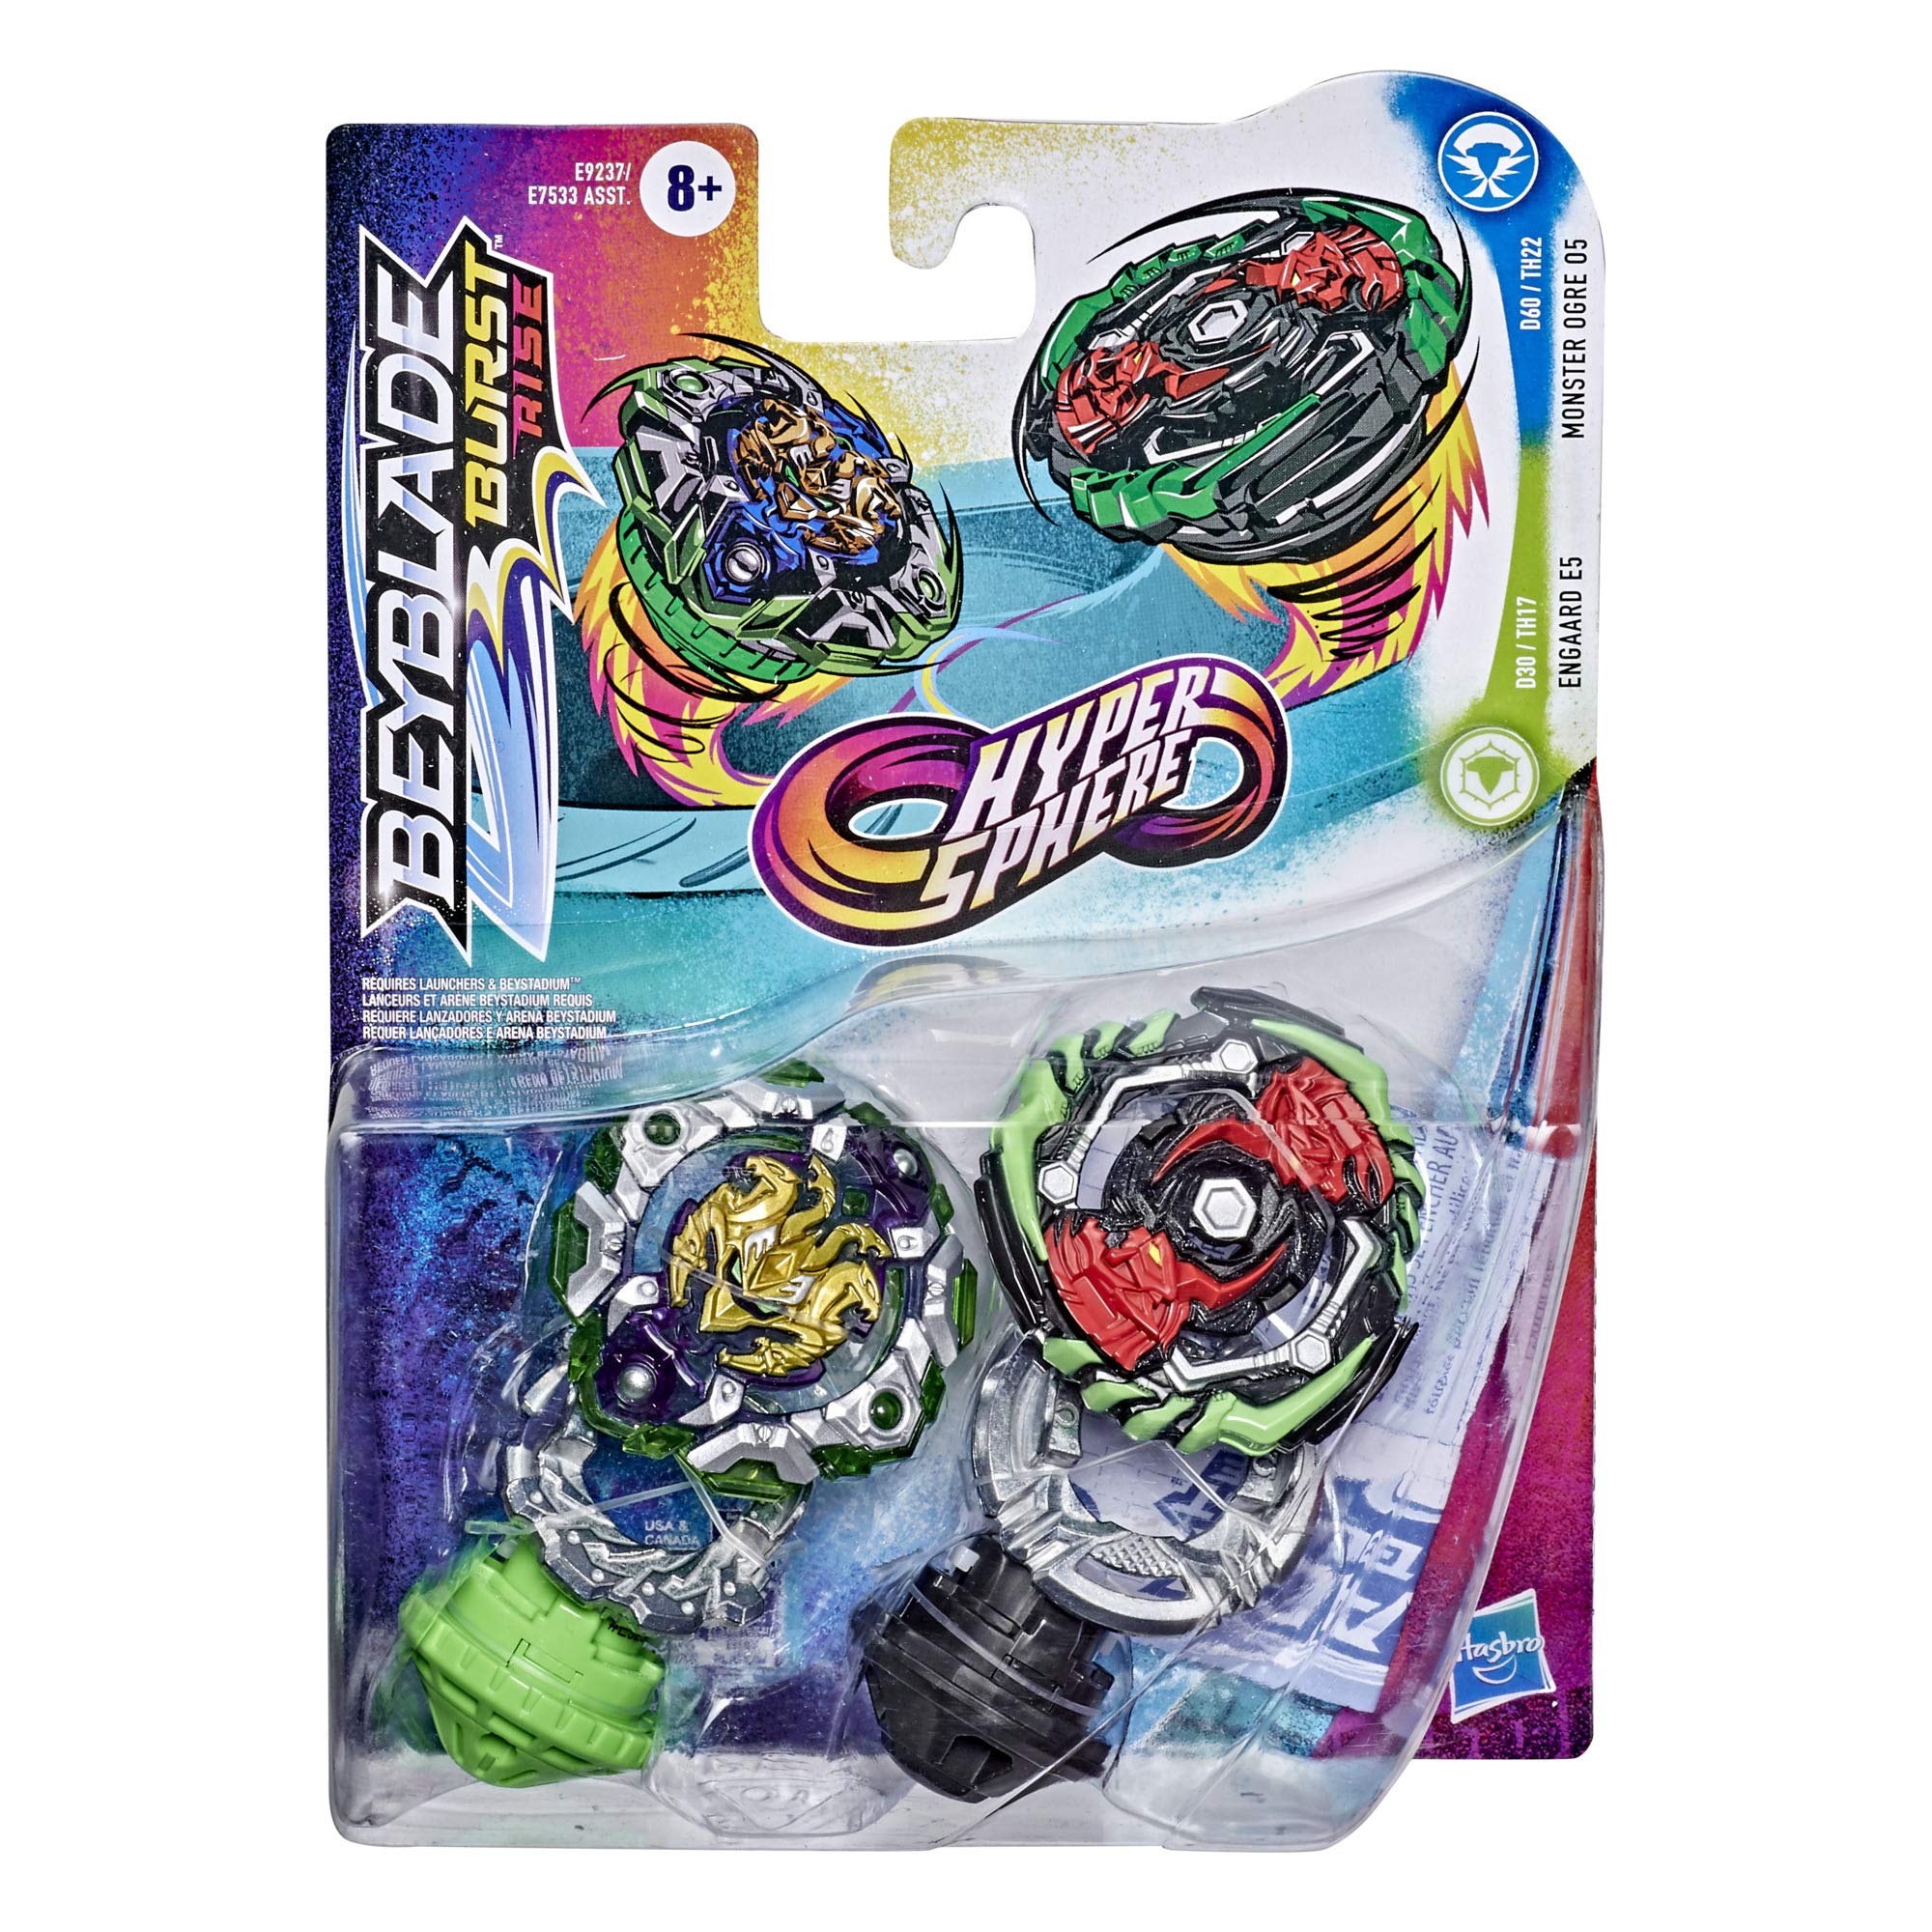 BEYBLADE Burst Rise Hypersphere Dual Pack Monster Ogre O5 and Engaard E5-2 Right-Spin Battling Top Toys, Ages 8 and Up